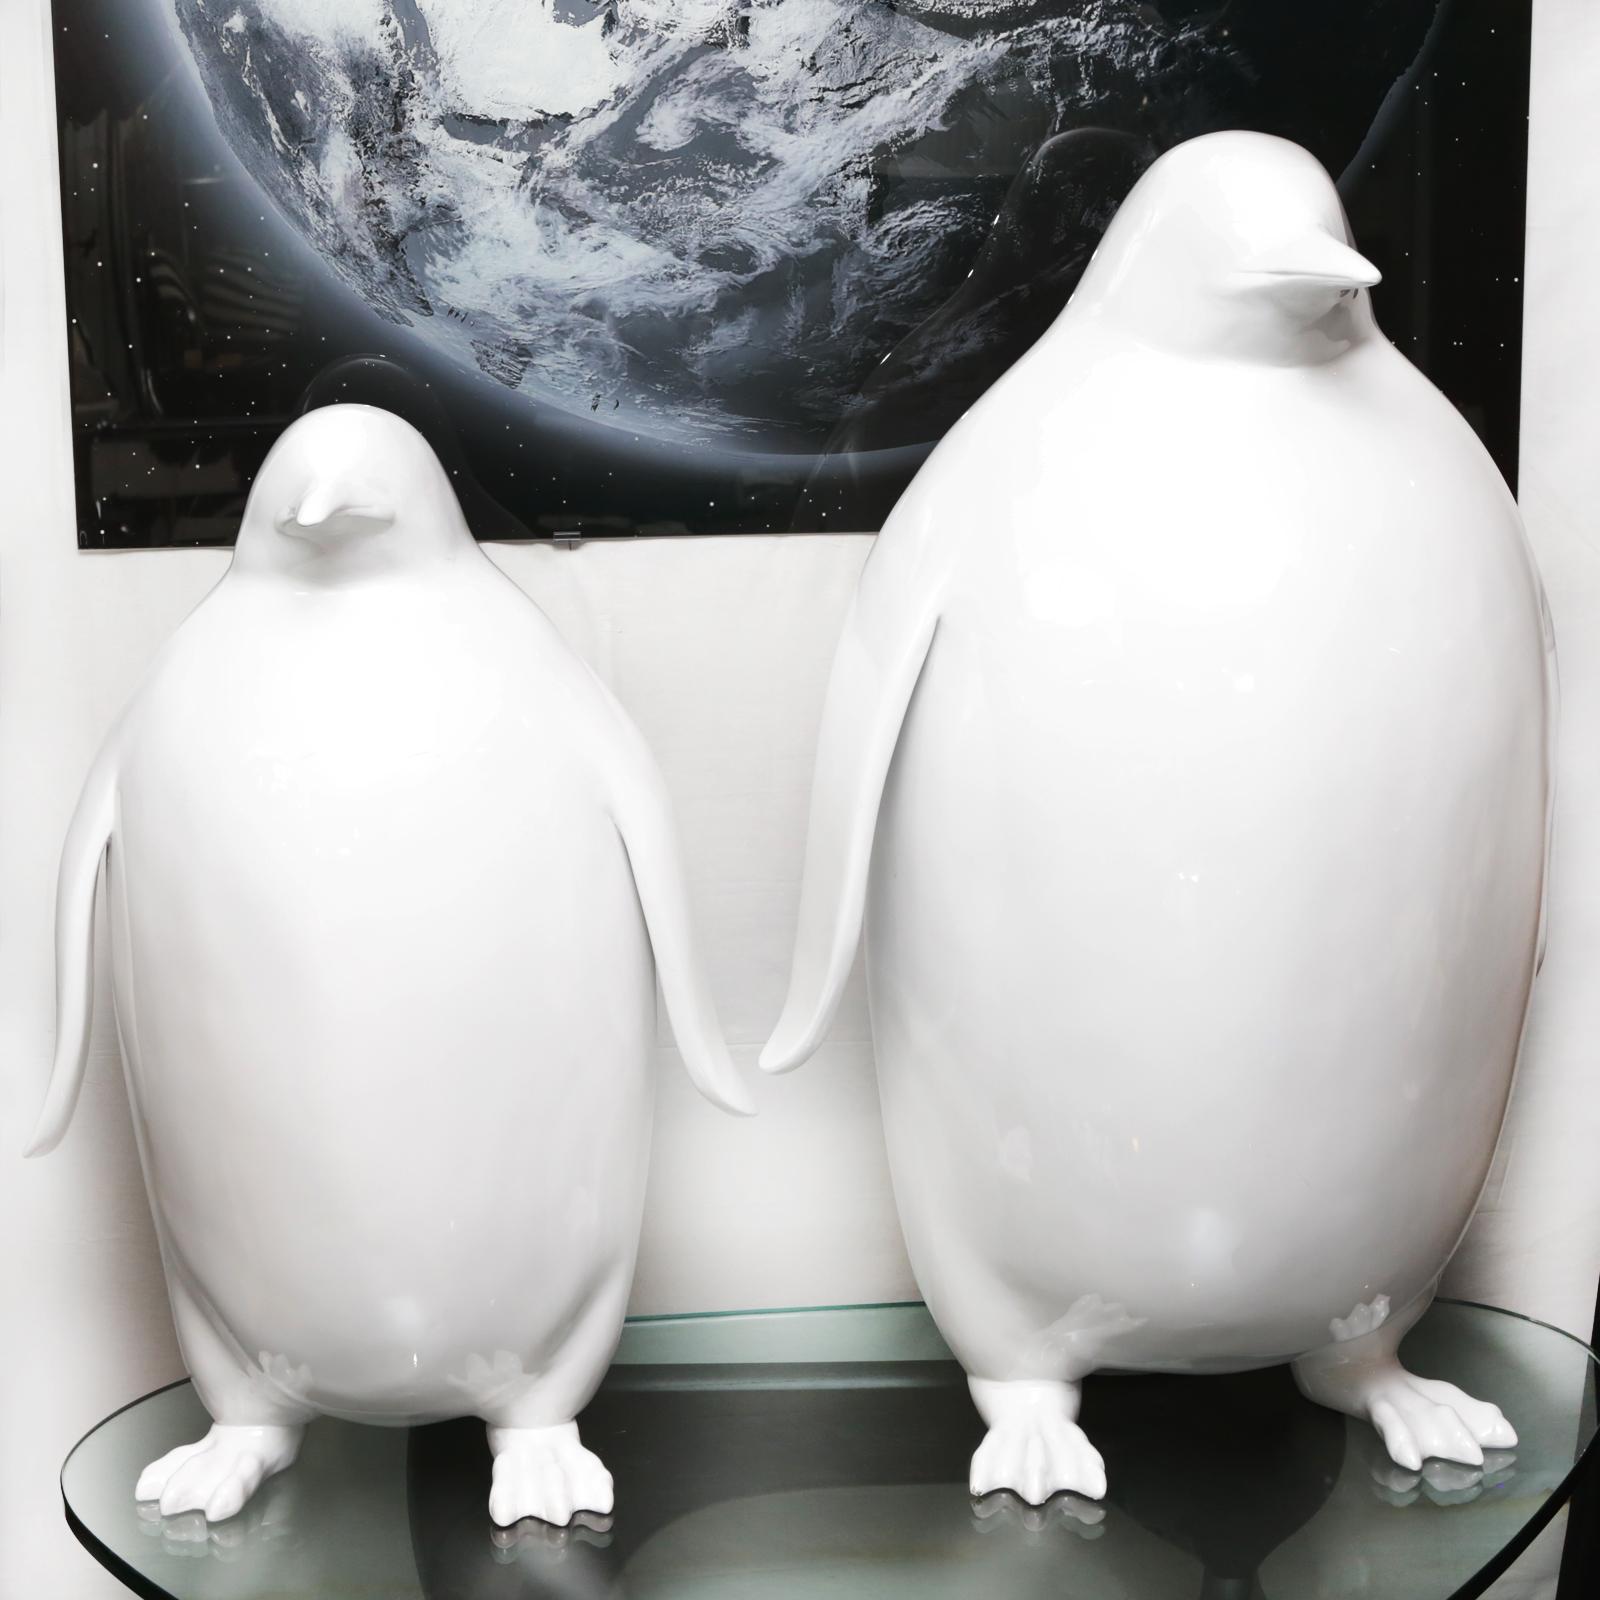 Sculpture of Emperor penguin in varnished white
lacquered resin.
Created by David Rousselot – Paris
Two sizes available.
Measures: 
Small model, L 50 x D 40 x H 85cm. Price: €4250.00
Small model available now.
Large model, L 70 x D 50 x H100cm.